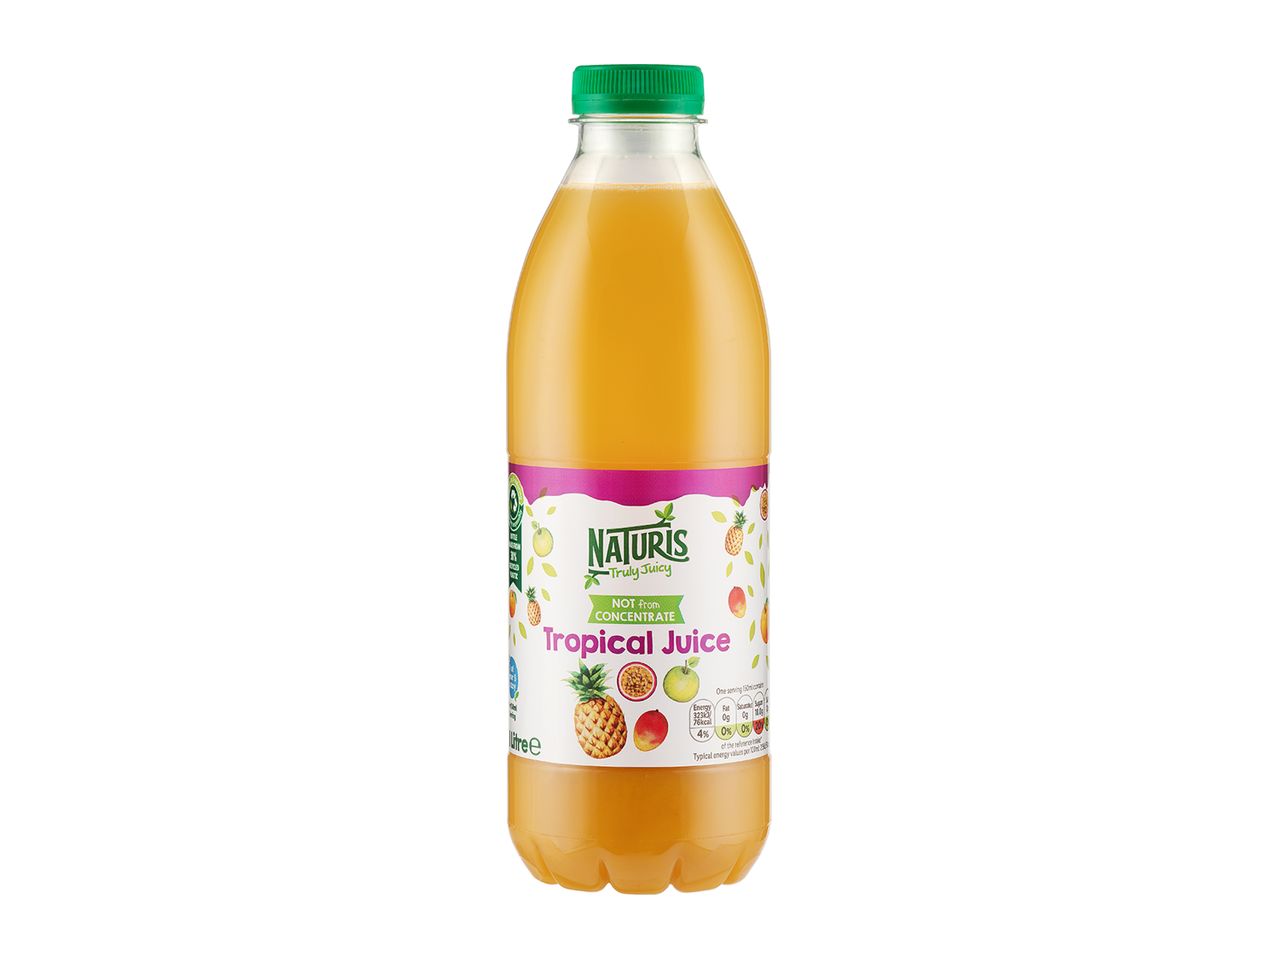 Go to full screen view: Naturis Tropical Juice - Image 1